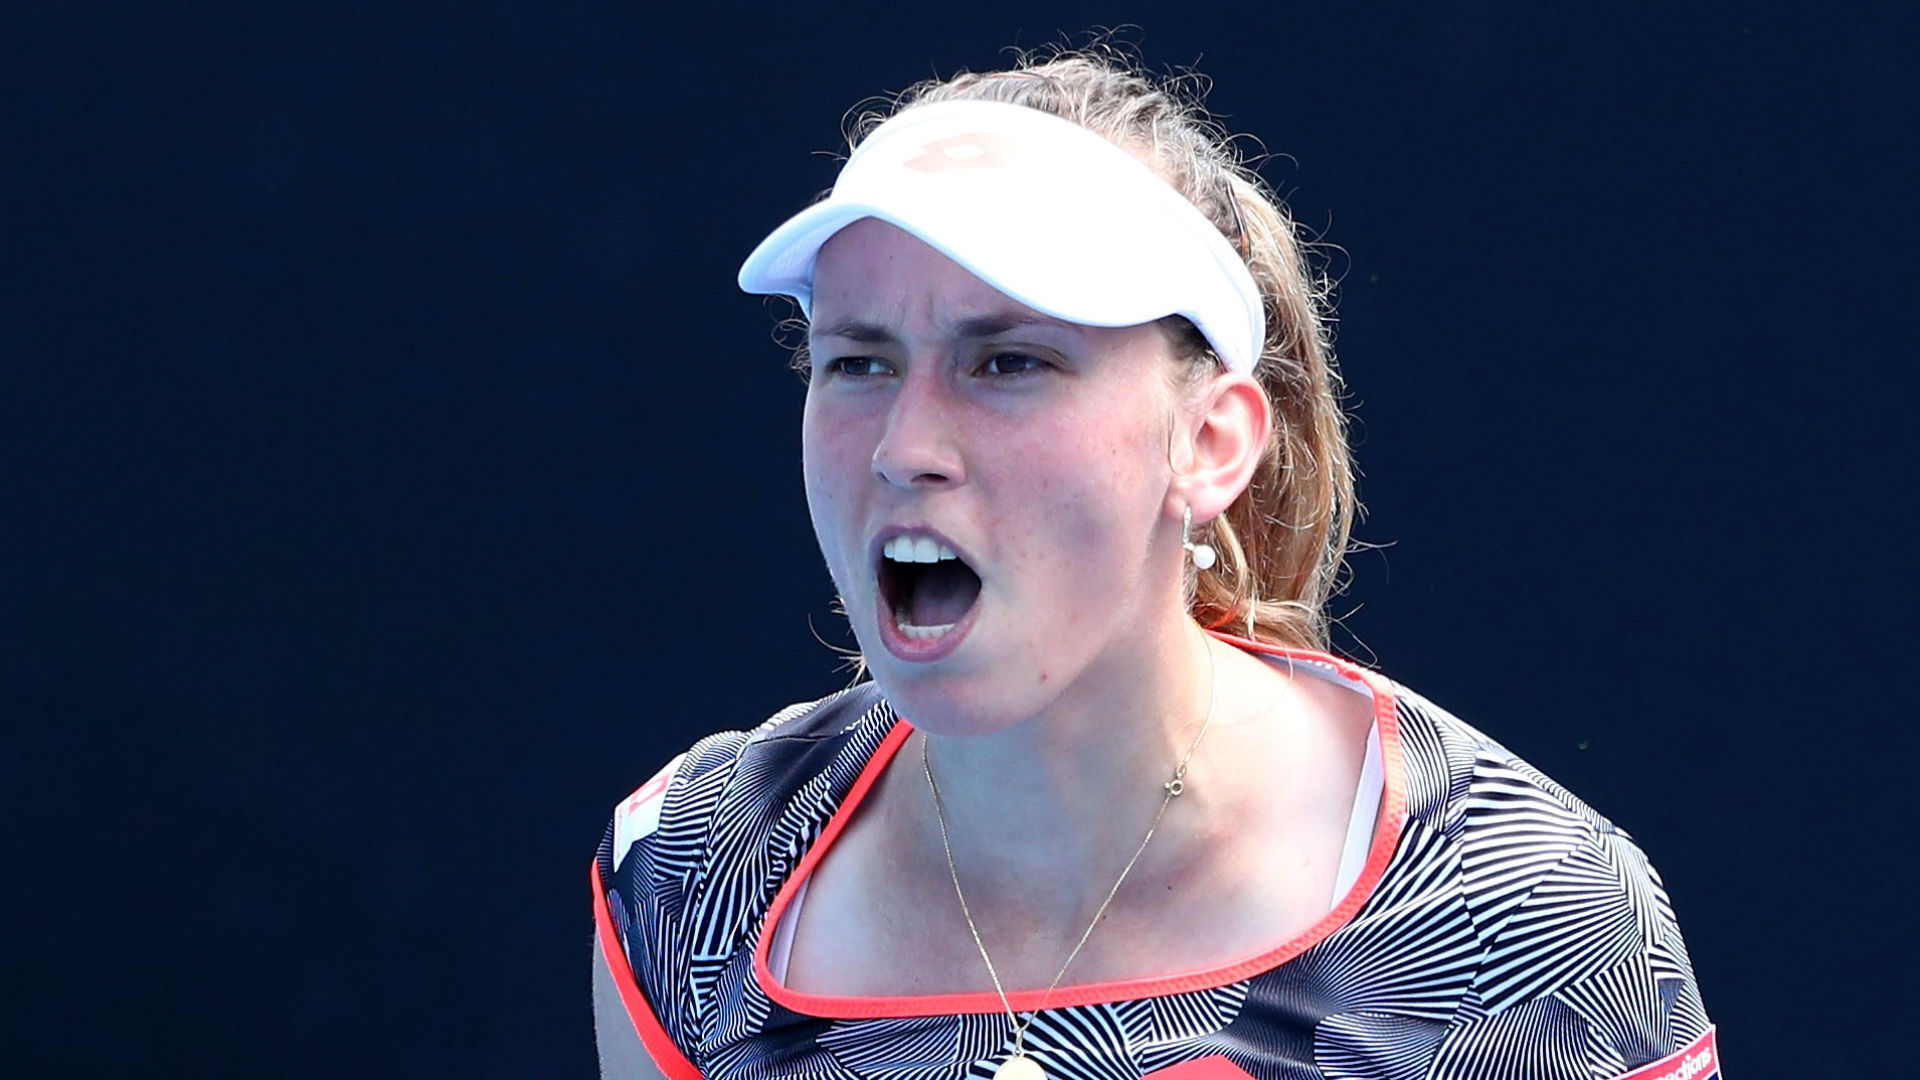 Elise Mertens will play in her first WTA Premier final this weekend after claiming the scalp of three-time major champion Angelique Kerber.